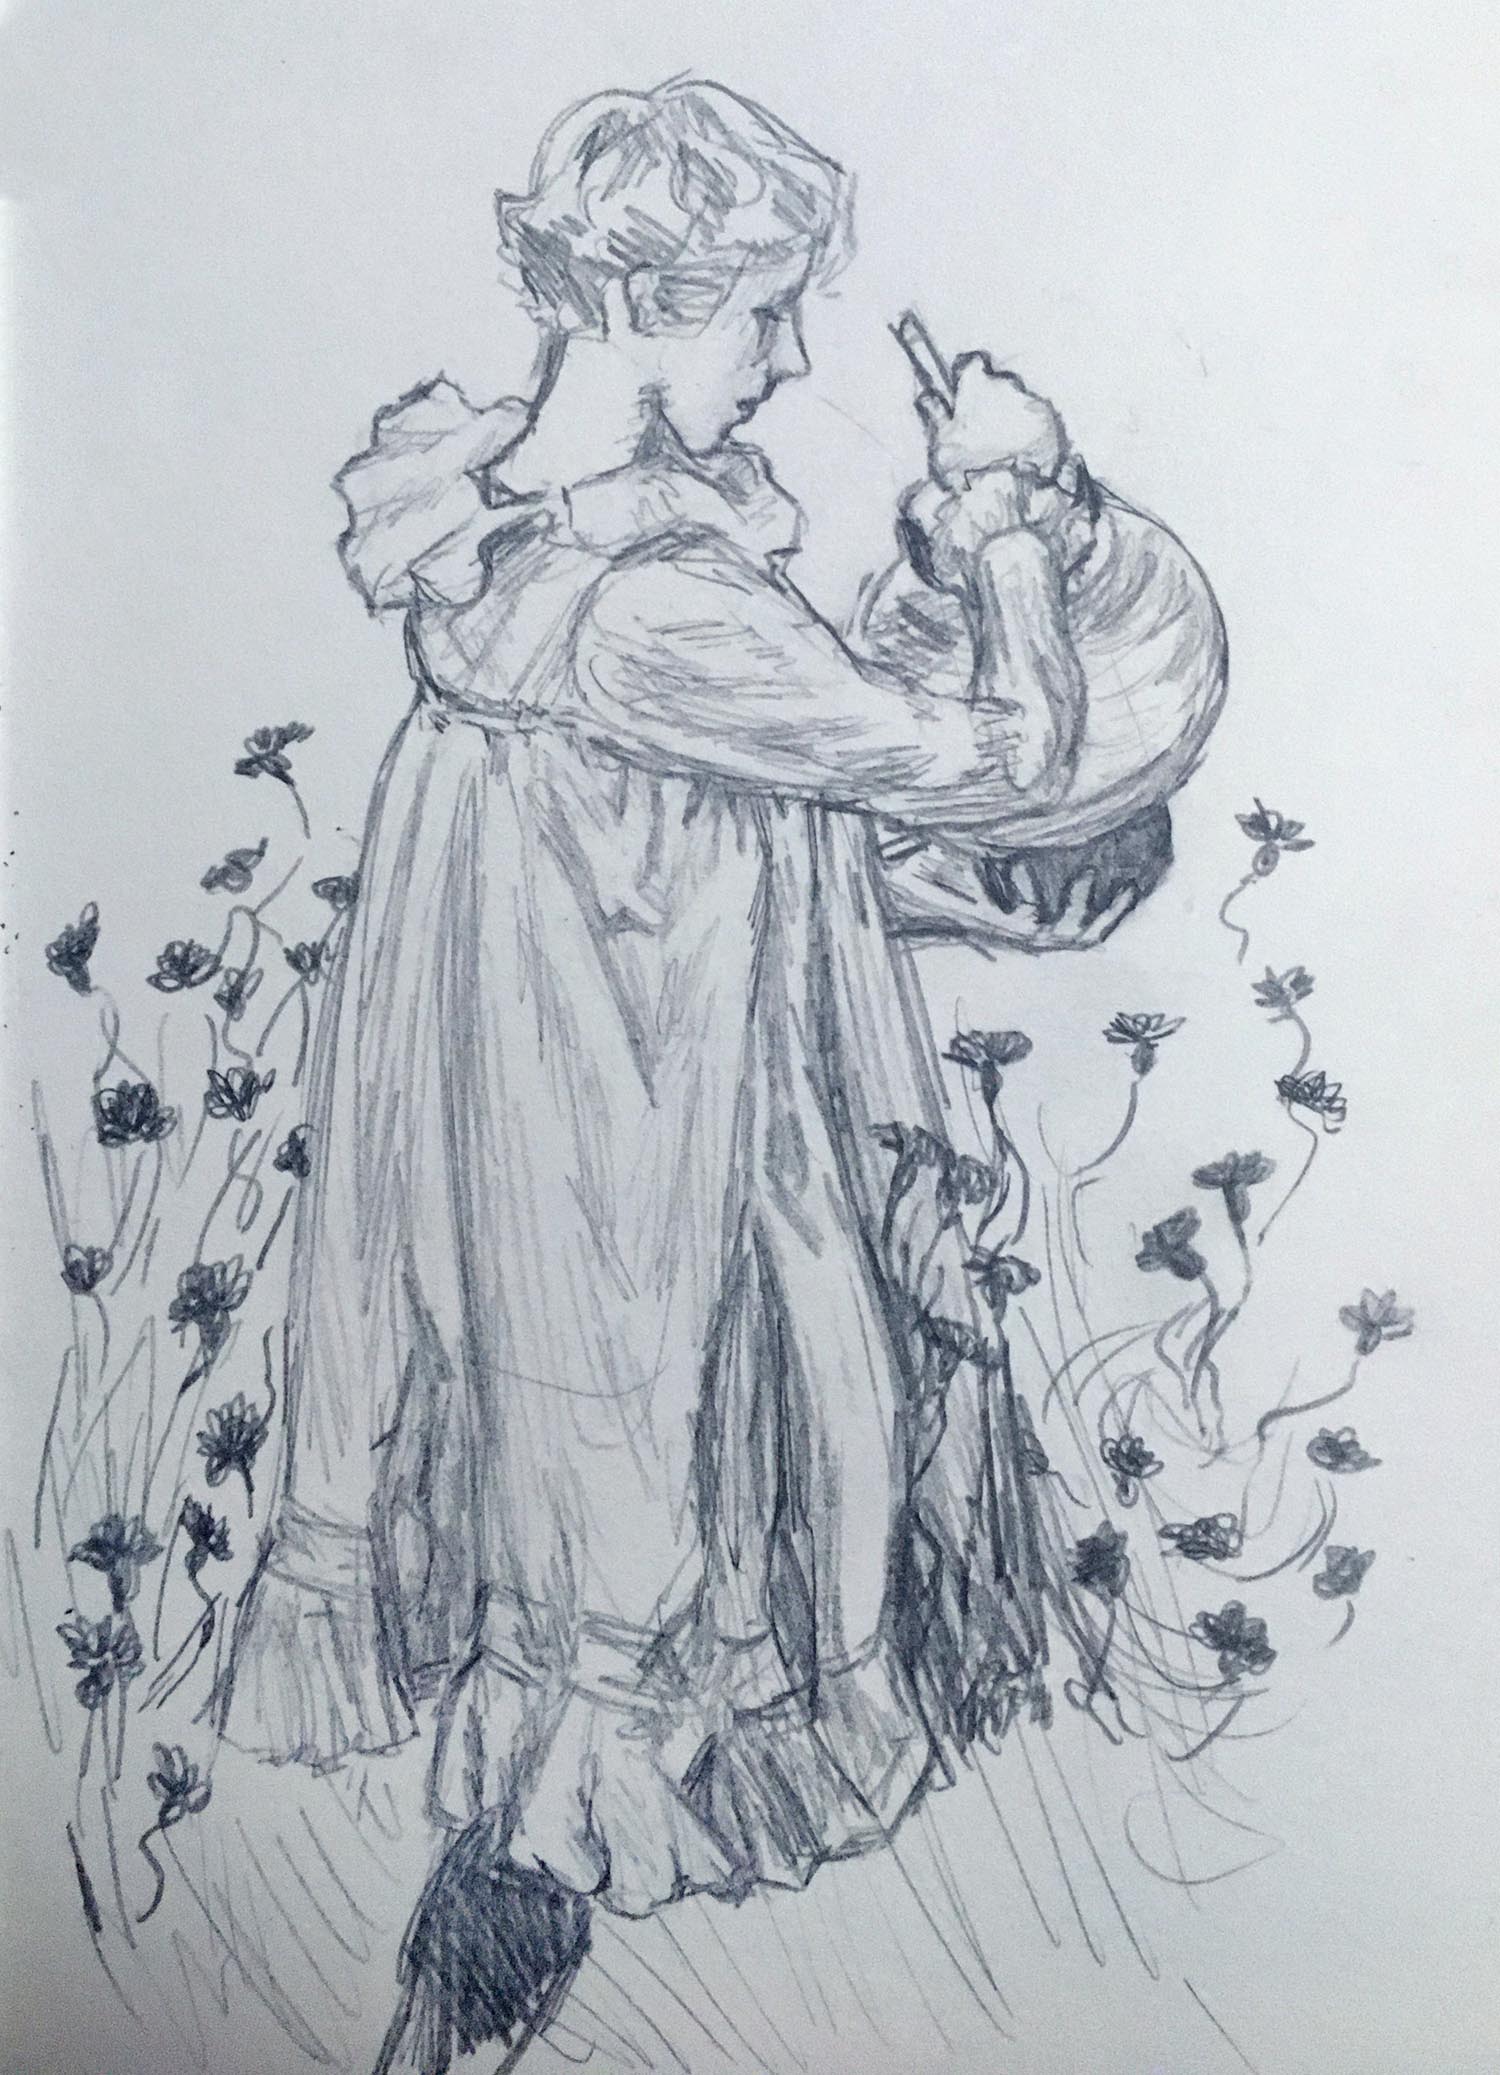 pencil sketch of girl in a frock lighting a lantern